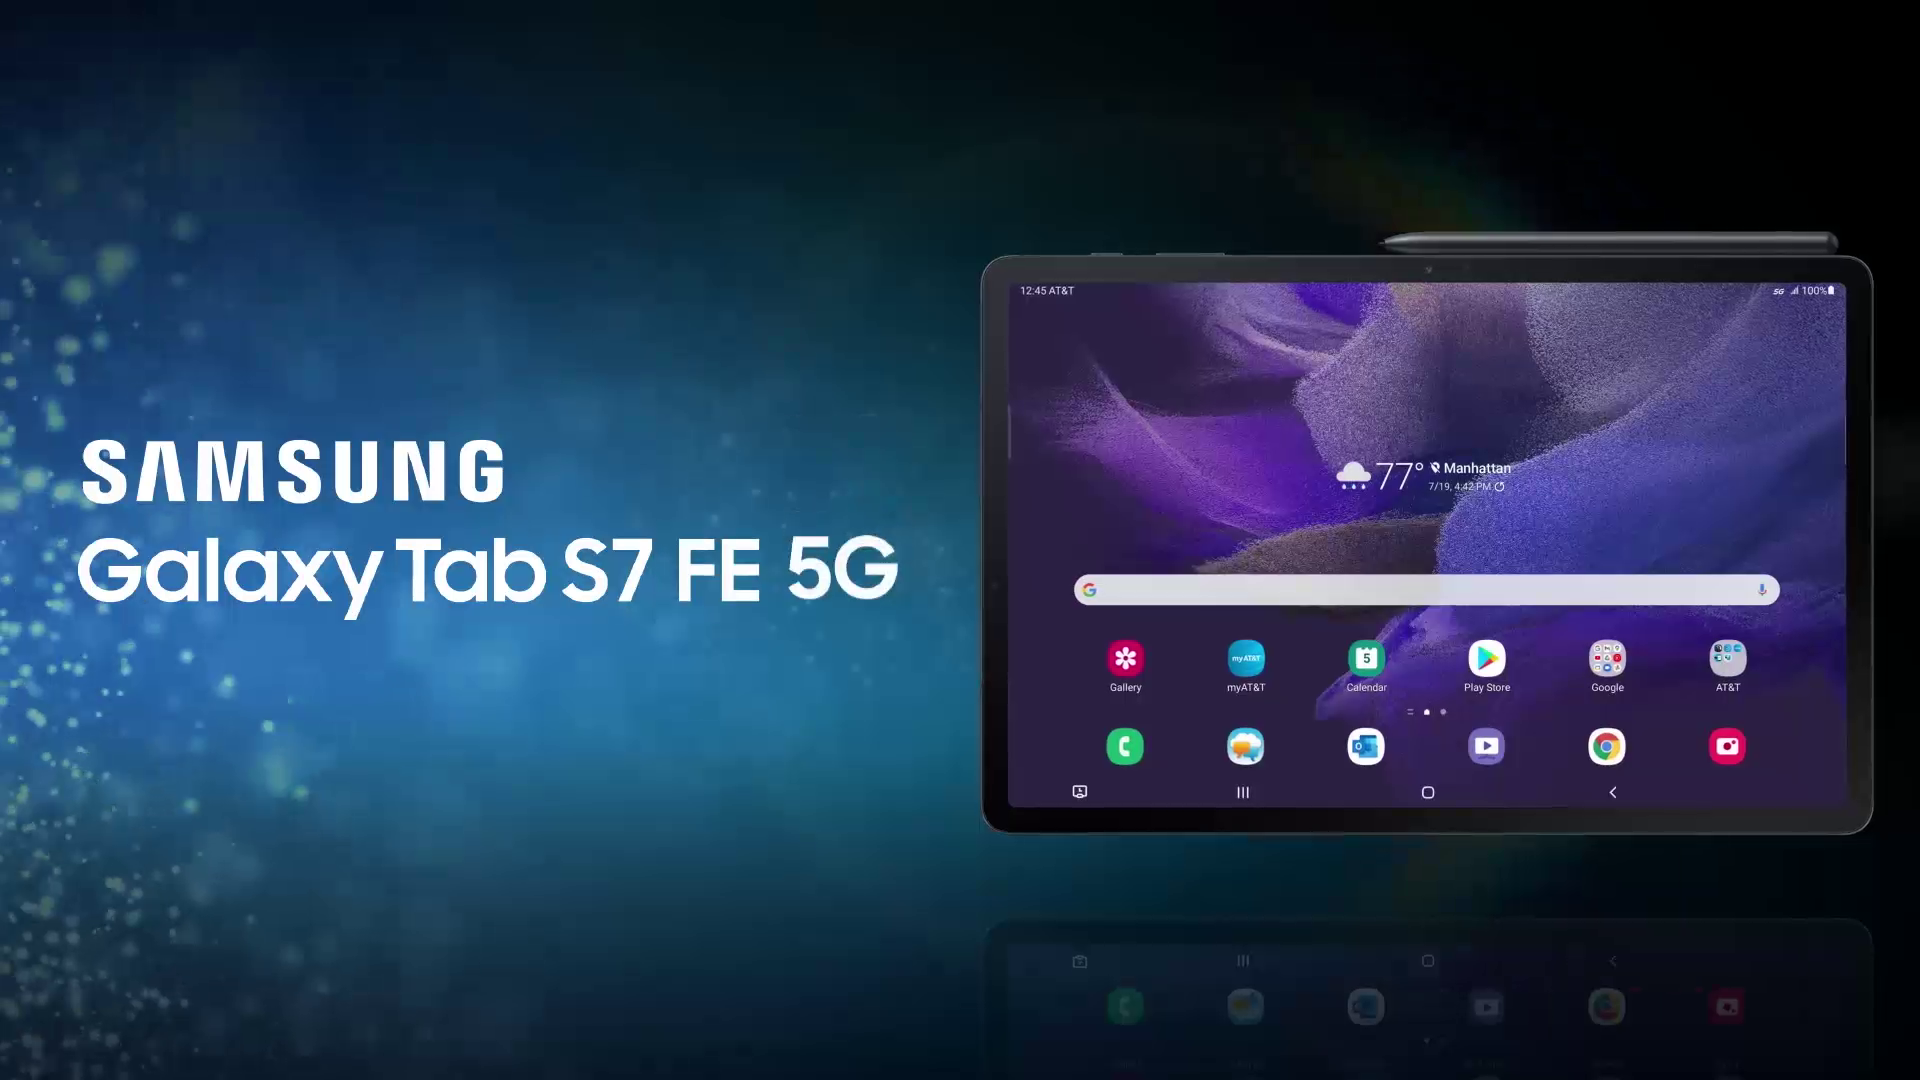 Samsung Galaxy Tab S7 FE 5G – Colors, Features & Reviews | AT&T